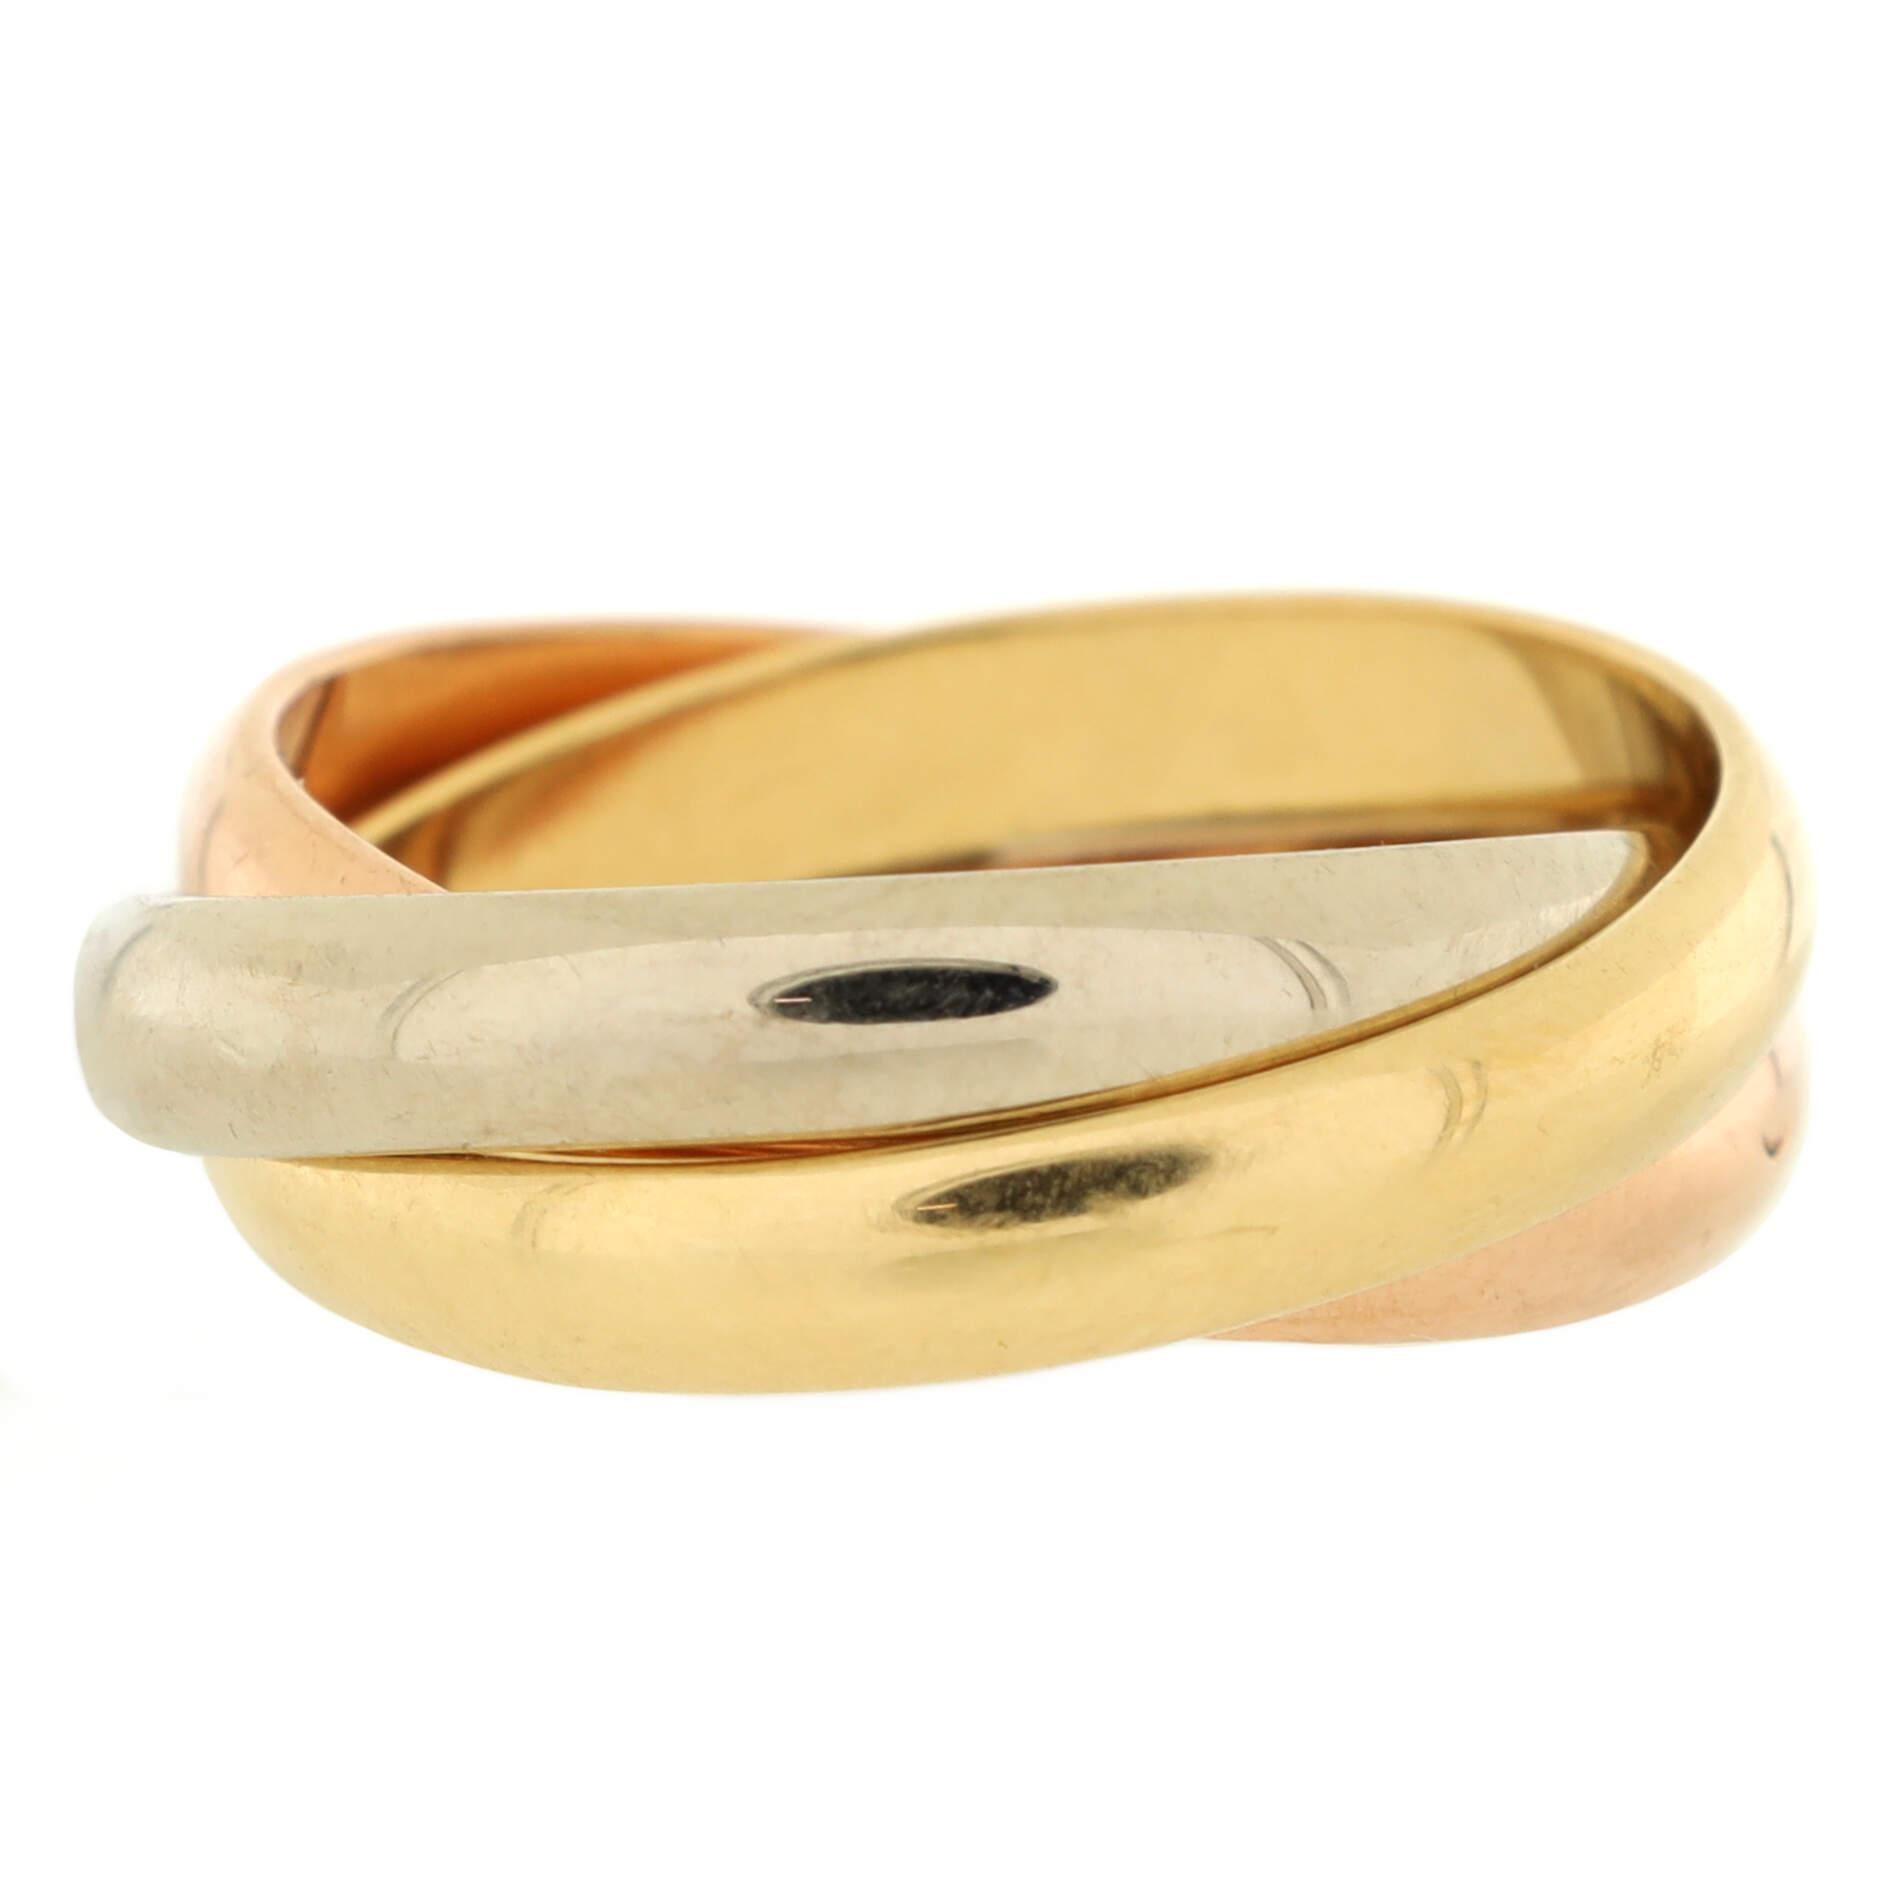 Condition: Very good. Moderate wear throughout.
Accessories: No Accessories
Measurements: Size: 7.25 - 55, Width: 3.30 mm
Designer: Cartier
Model: Trinity Ring 18K Tricolor Gold Medium
Exterior Color: Tricolor Gold
Item Number: 222346/1